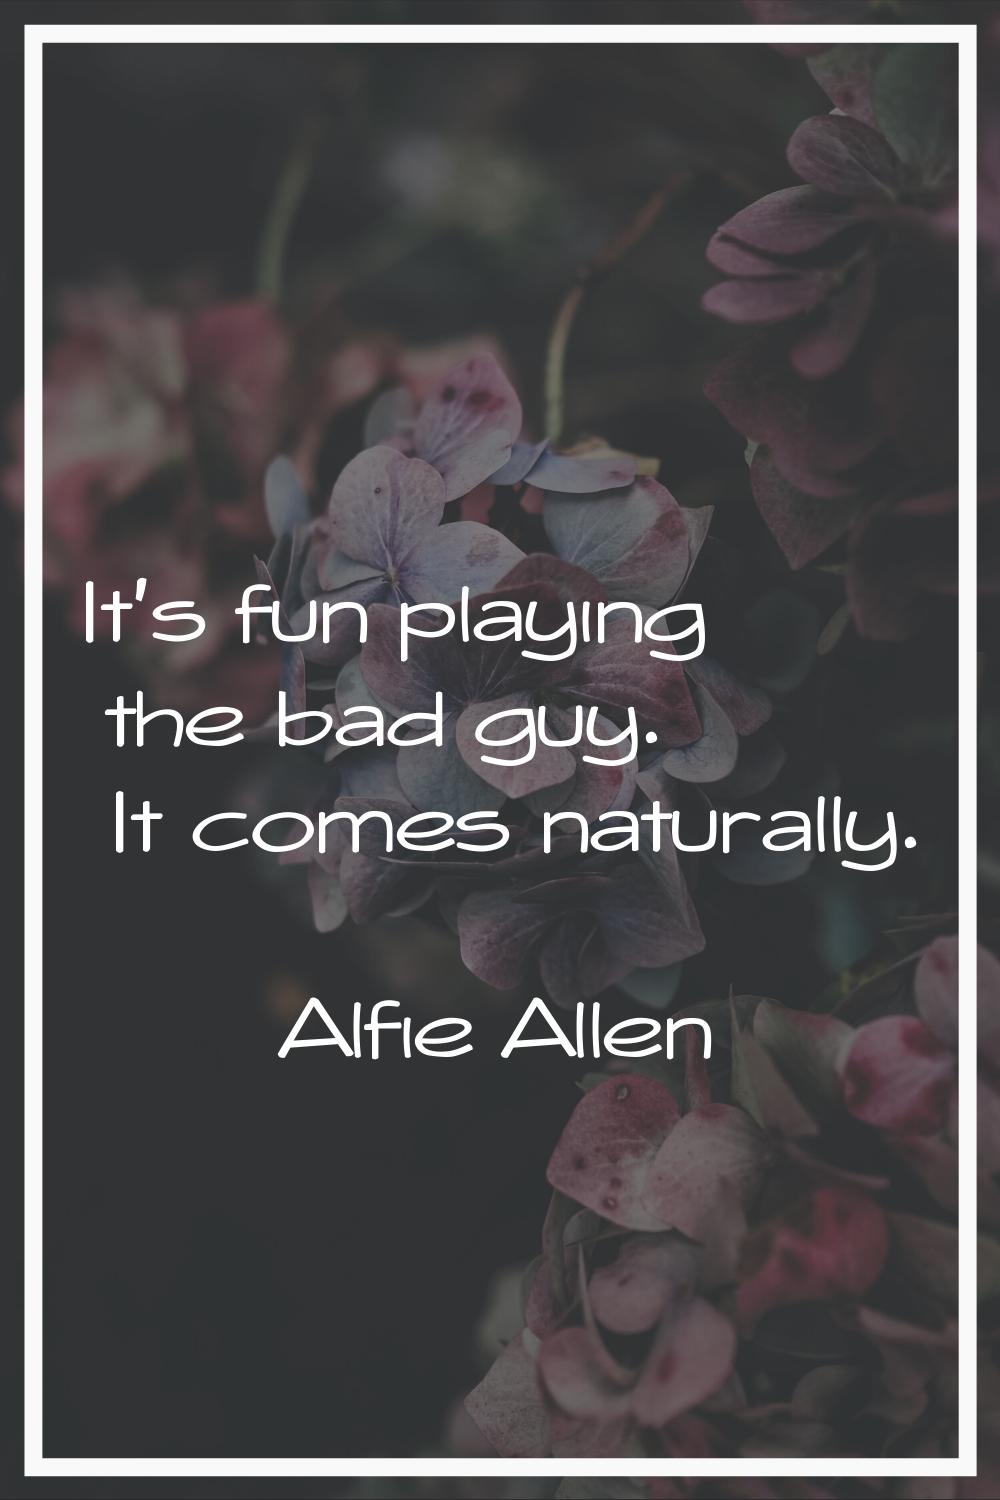 It's fun playing the bad guy. It comes naturally.